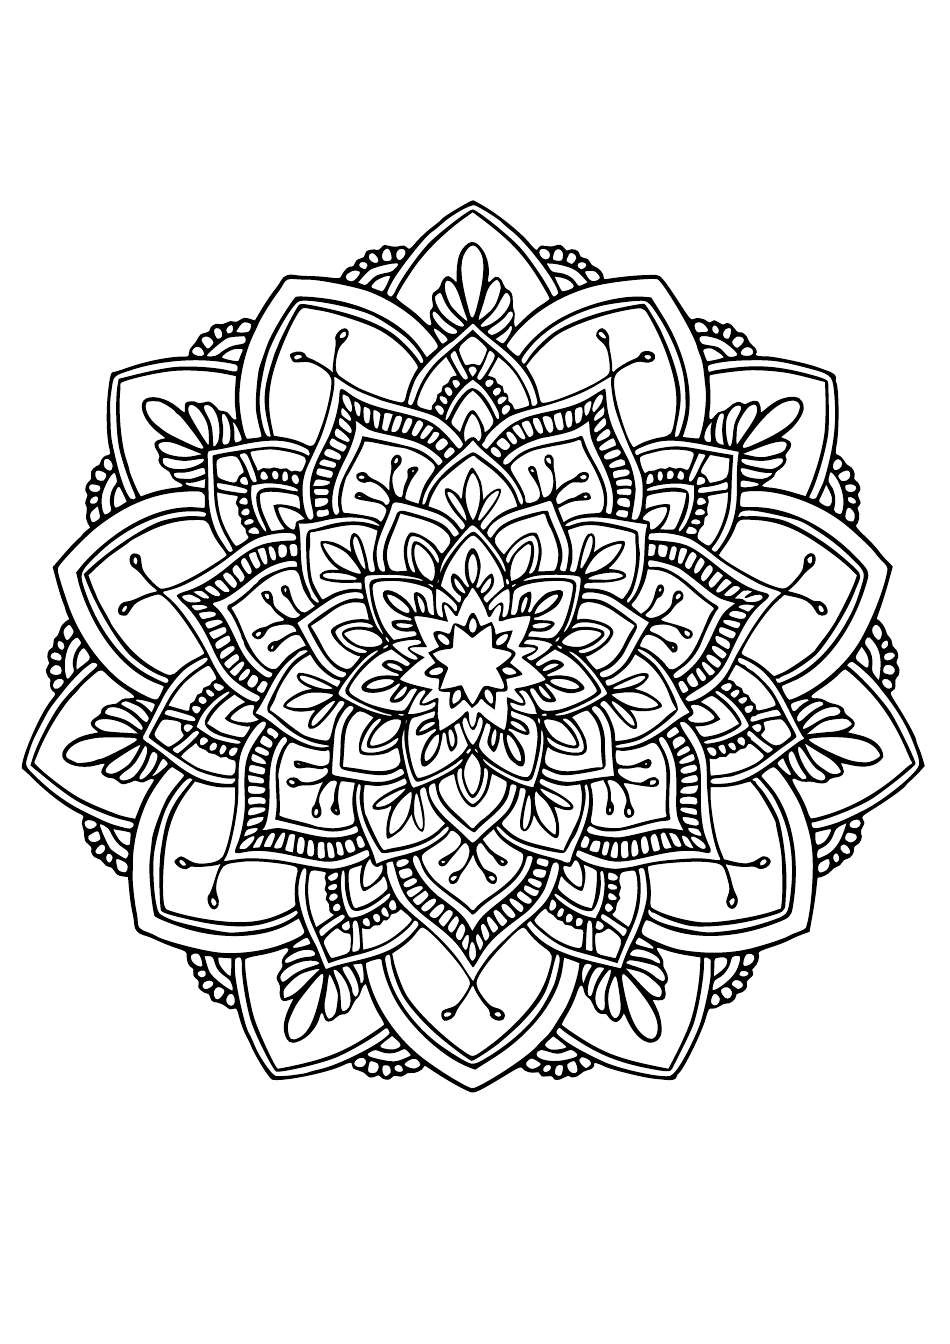 Blooming Flower Ornament Coloring Page Download Printable PDF ...